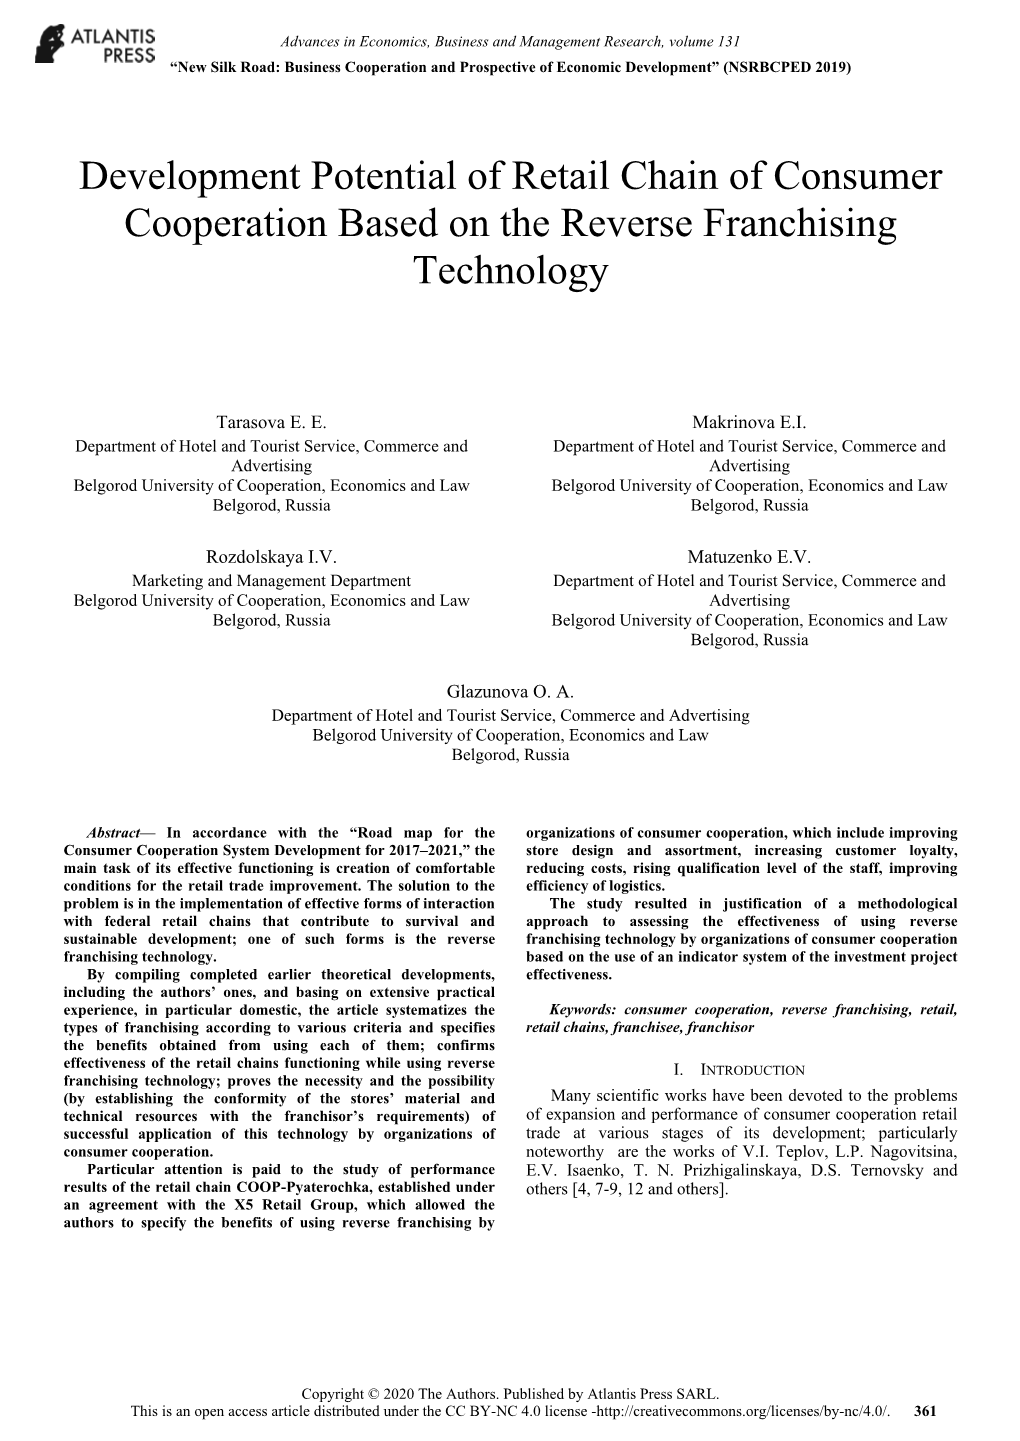 Development Potential of Retail Chain of Consumer Cooperation Based on the Reverse Franchising Technology